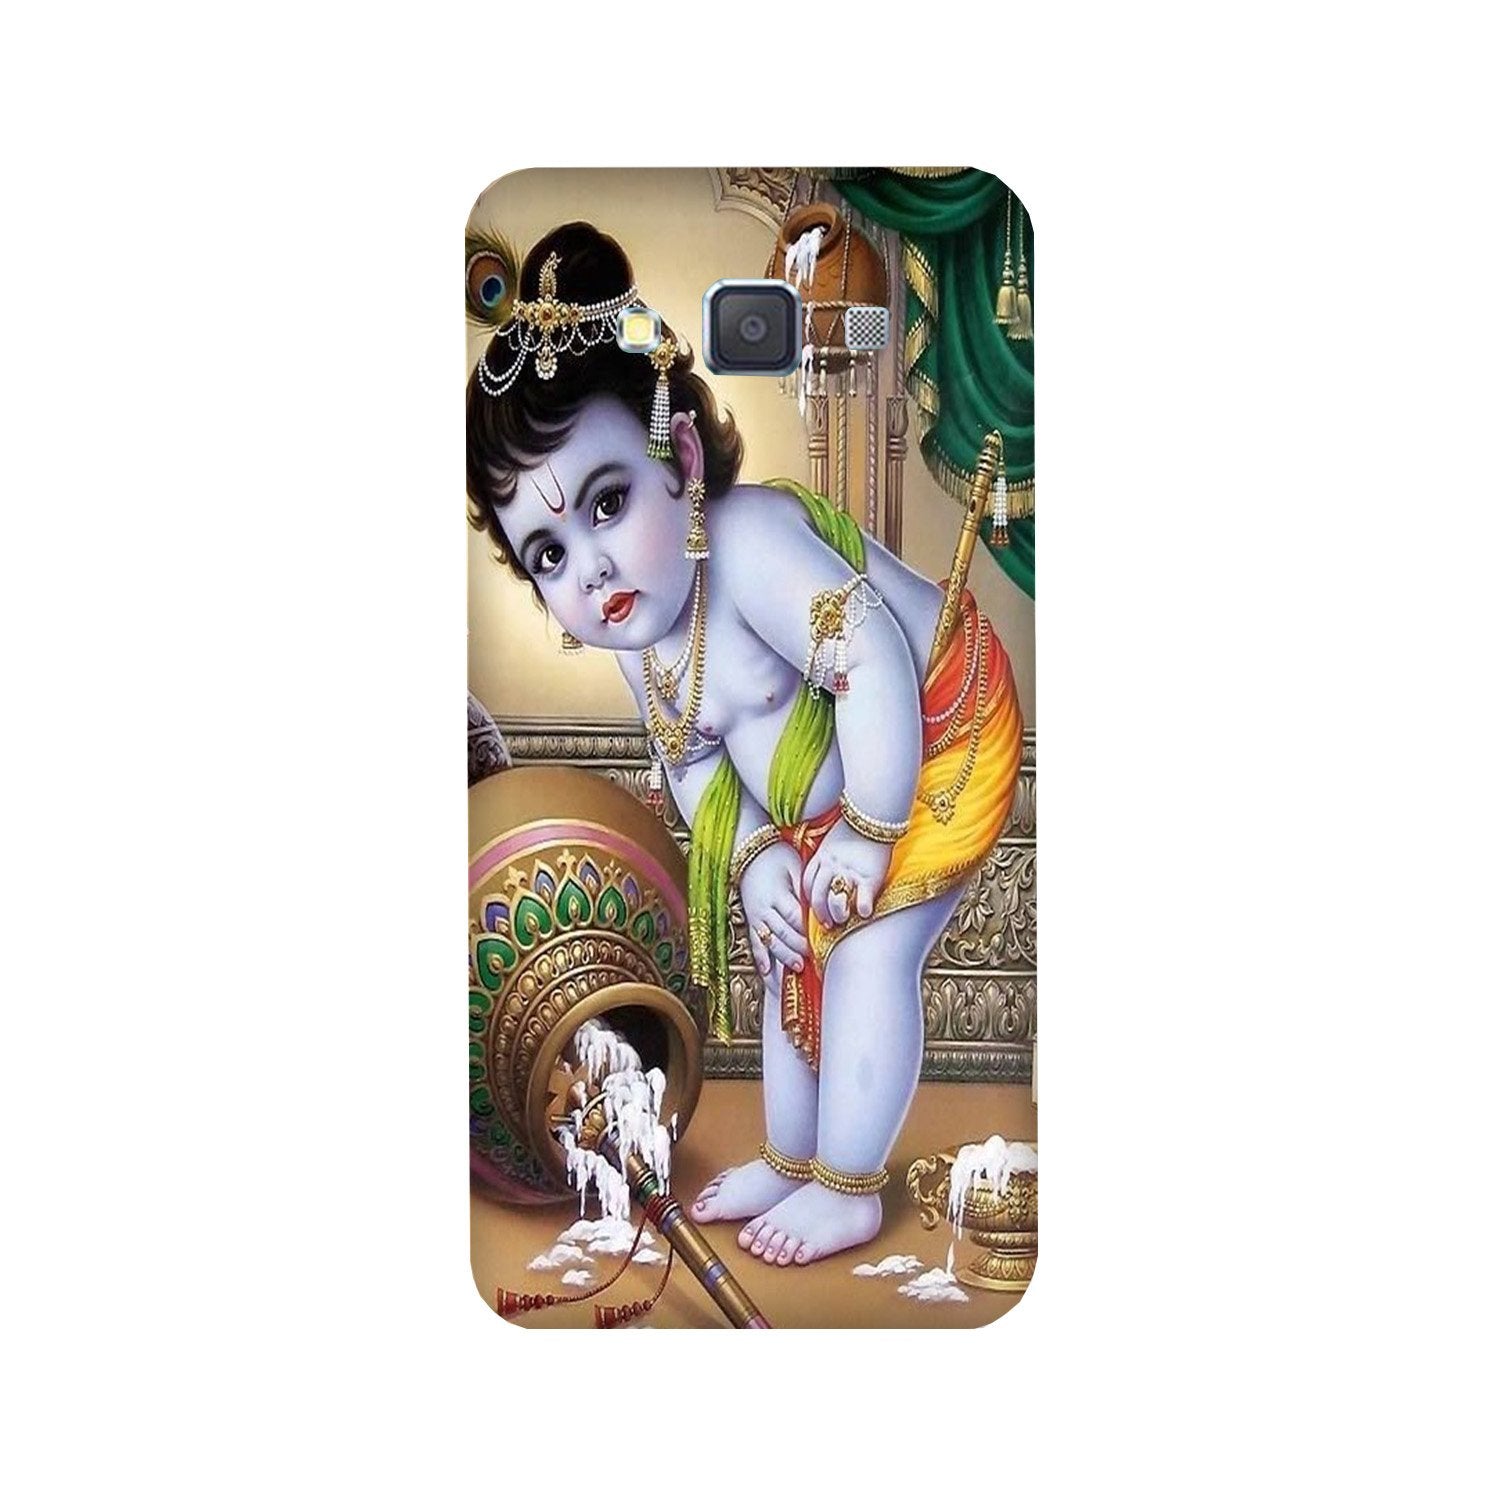 Bal Gopal2 Case for Galaxy ON7/ON7 Pro